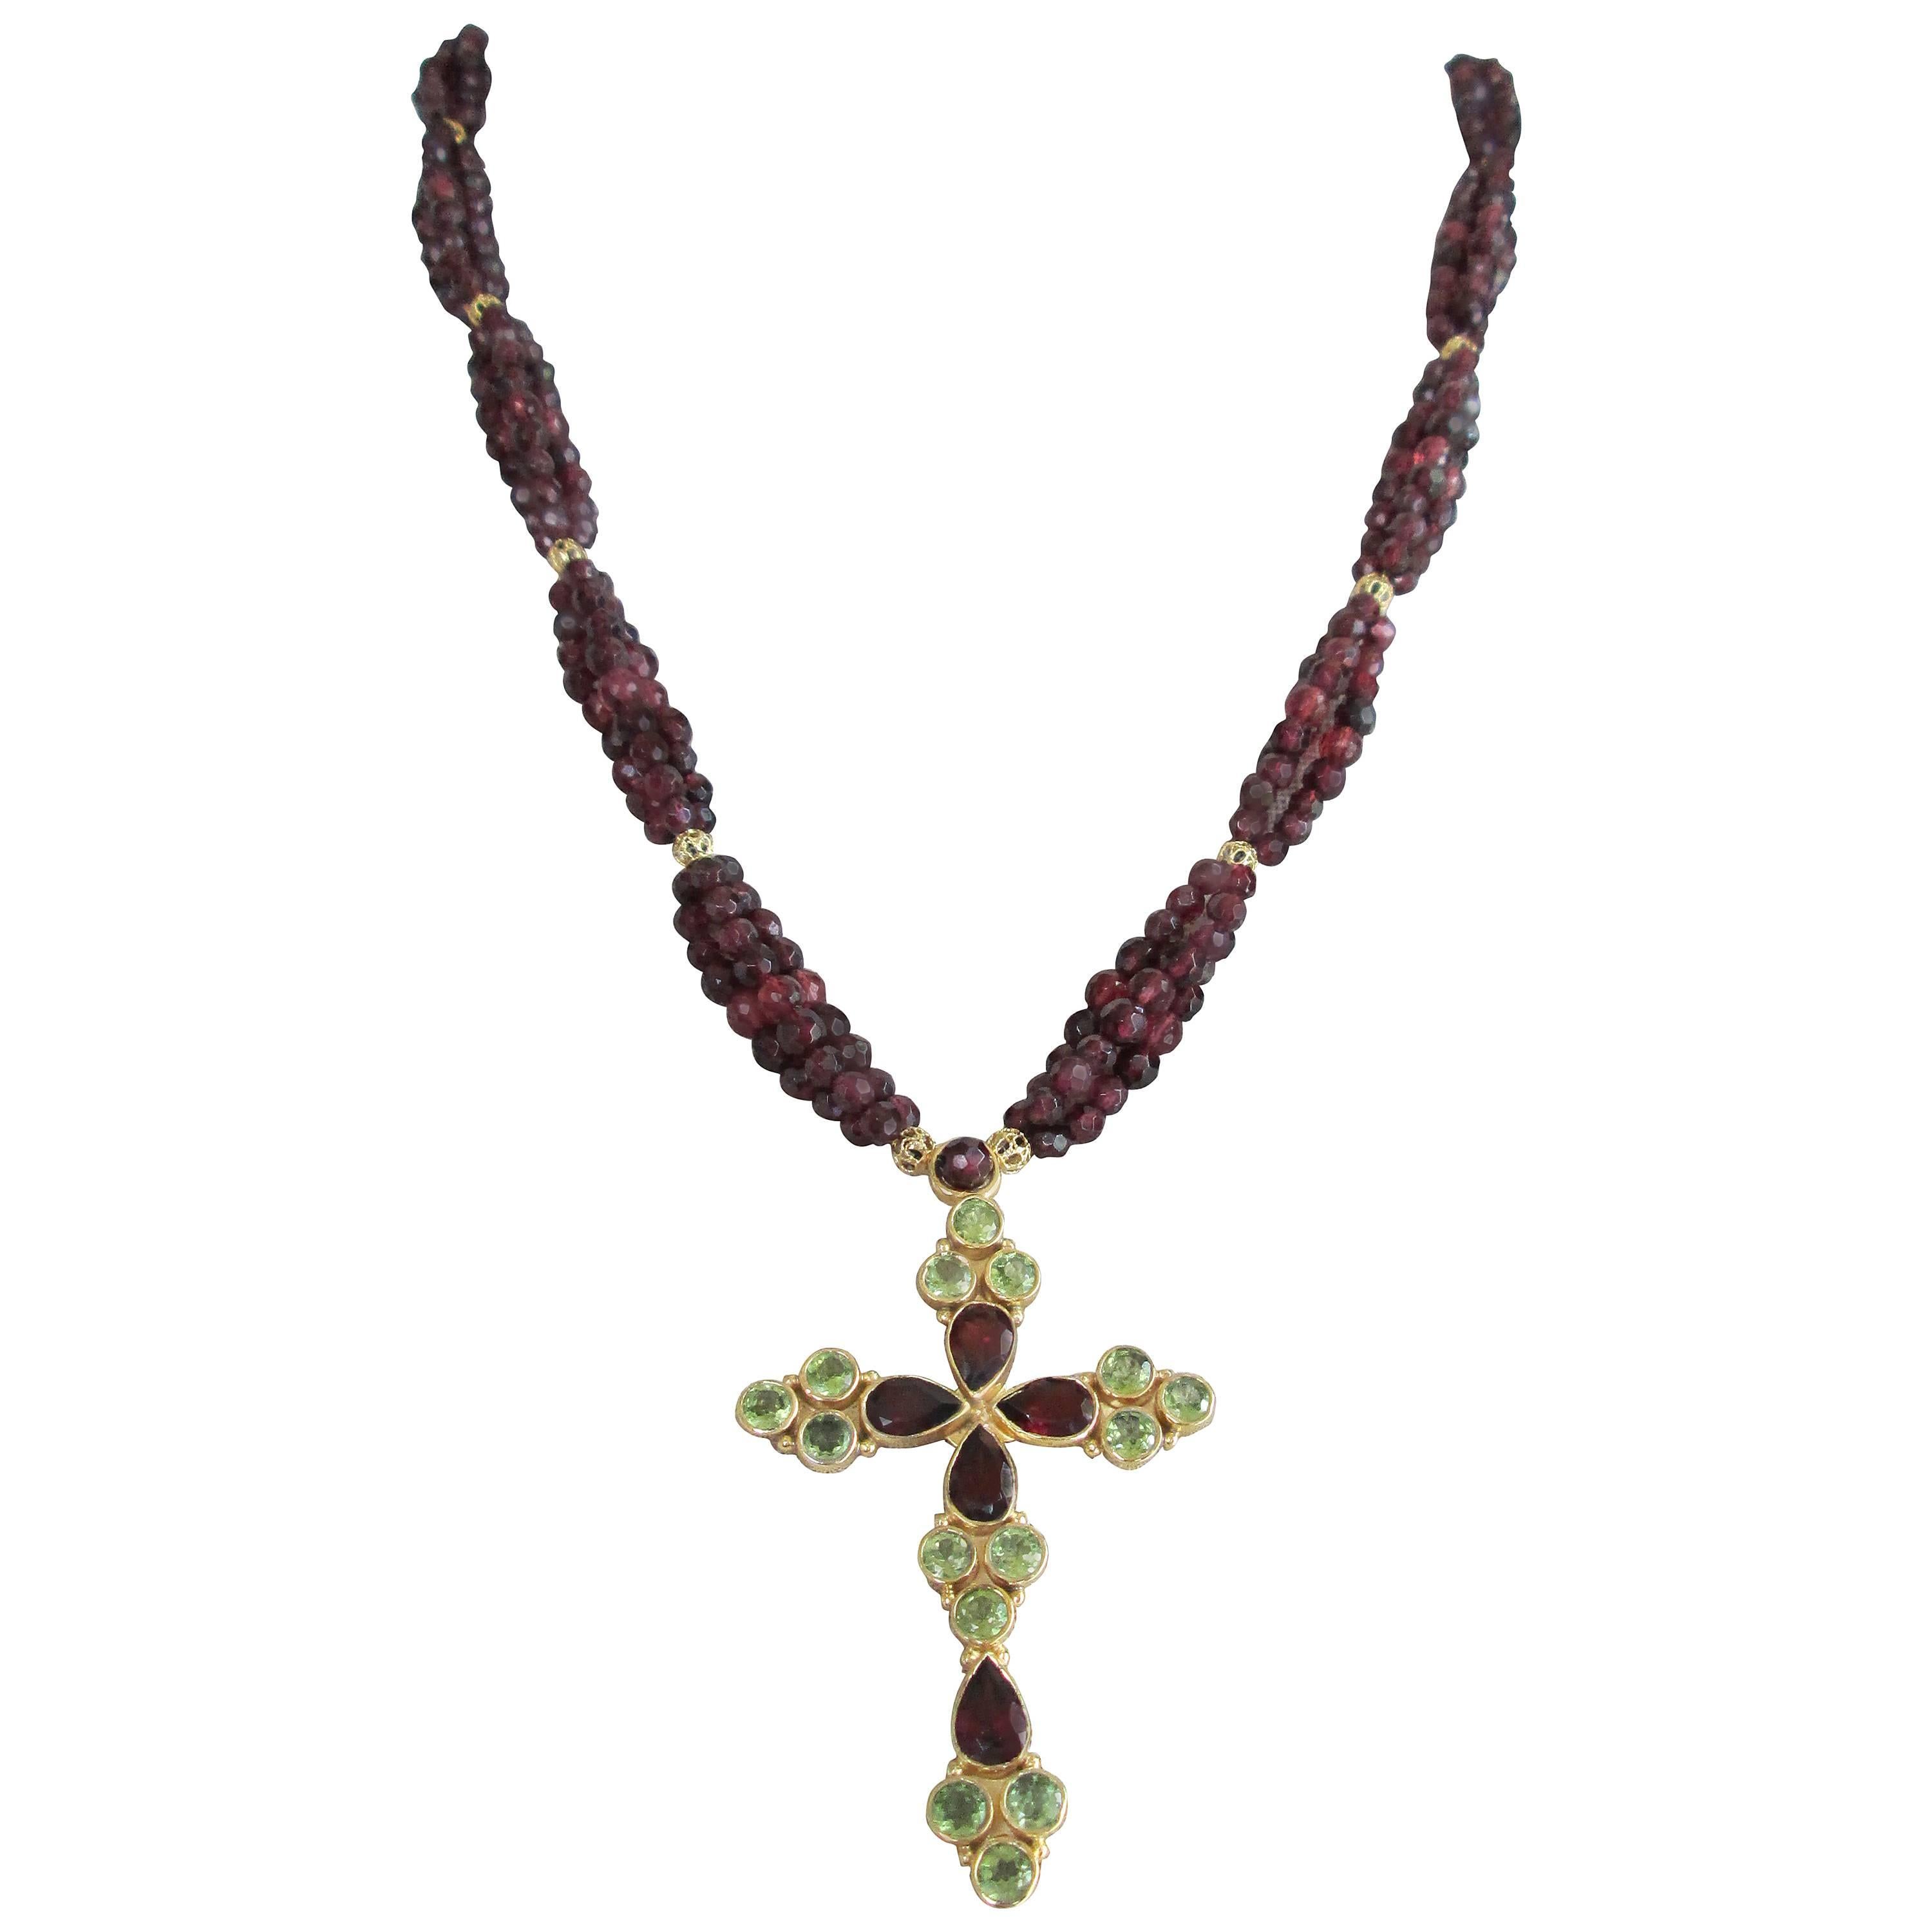 Faceted Garnet Bead Necklace with Peridot and Garnet Gold-Plated Silver Cross